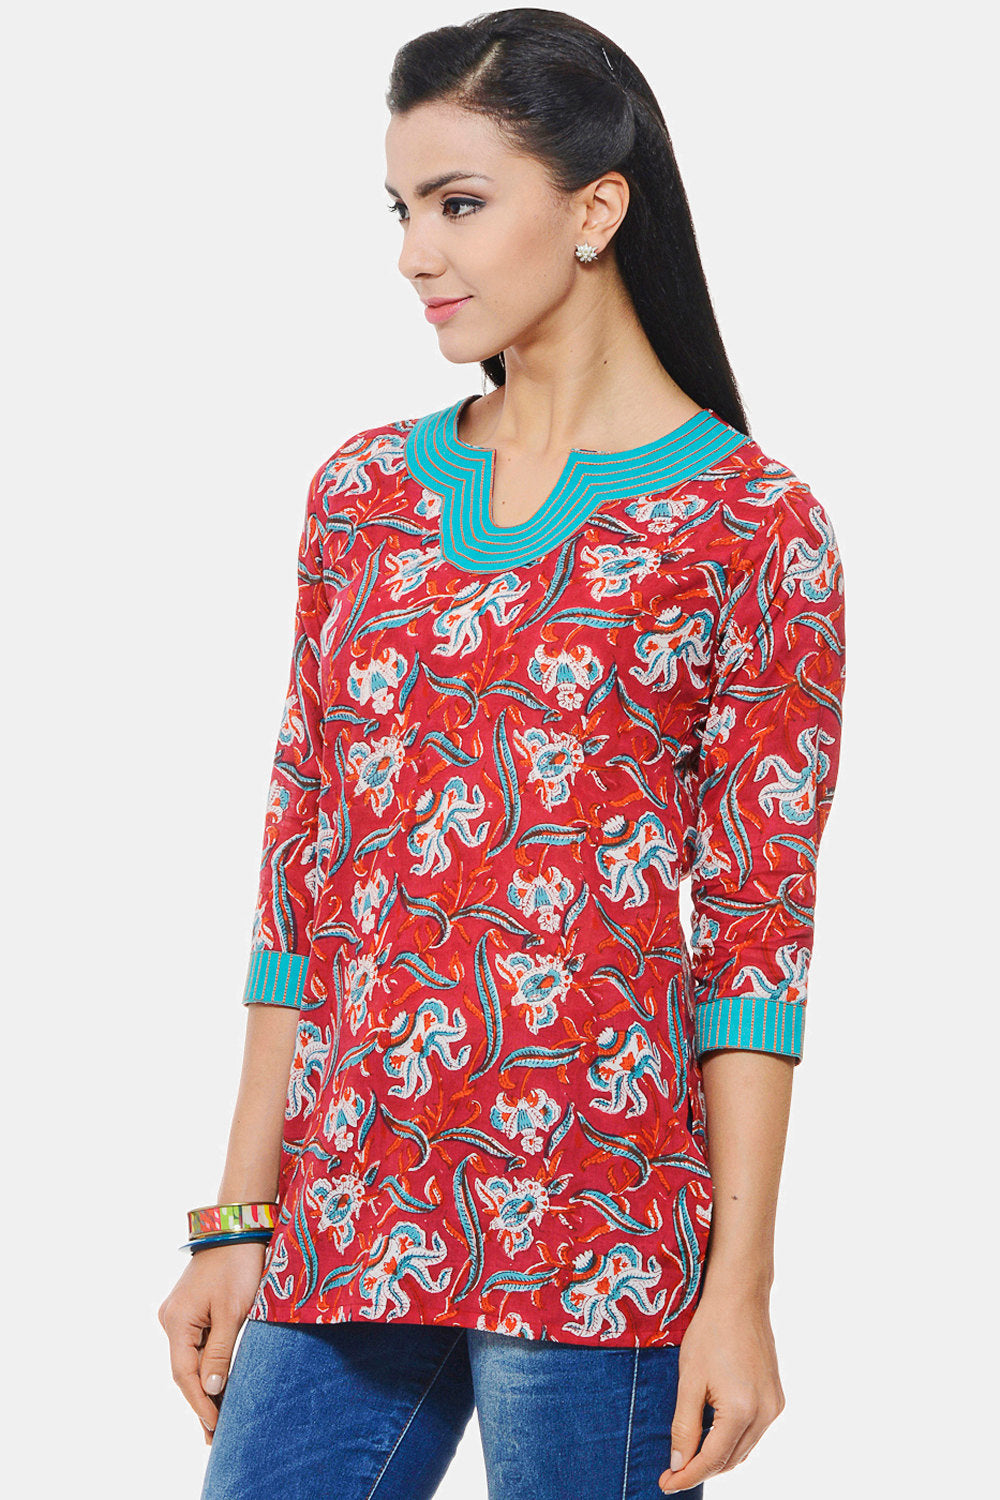 Hand Block Printed Indian Kurti in red floral design with Embroidery on neck and sleeves